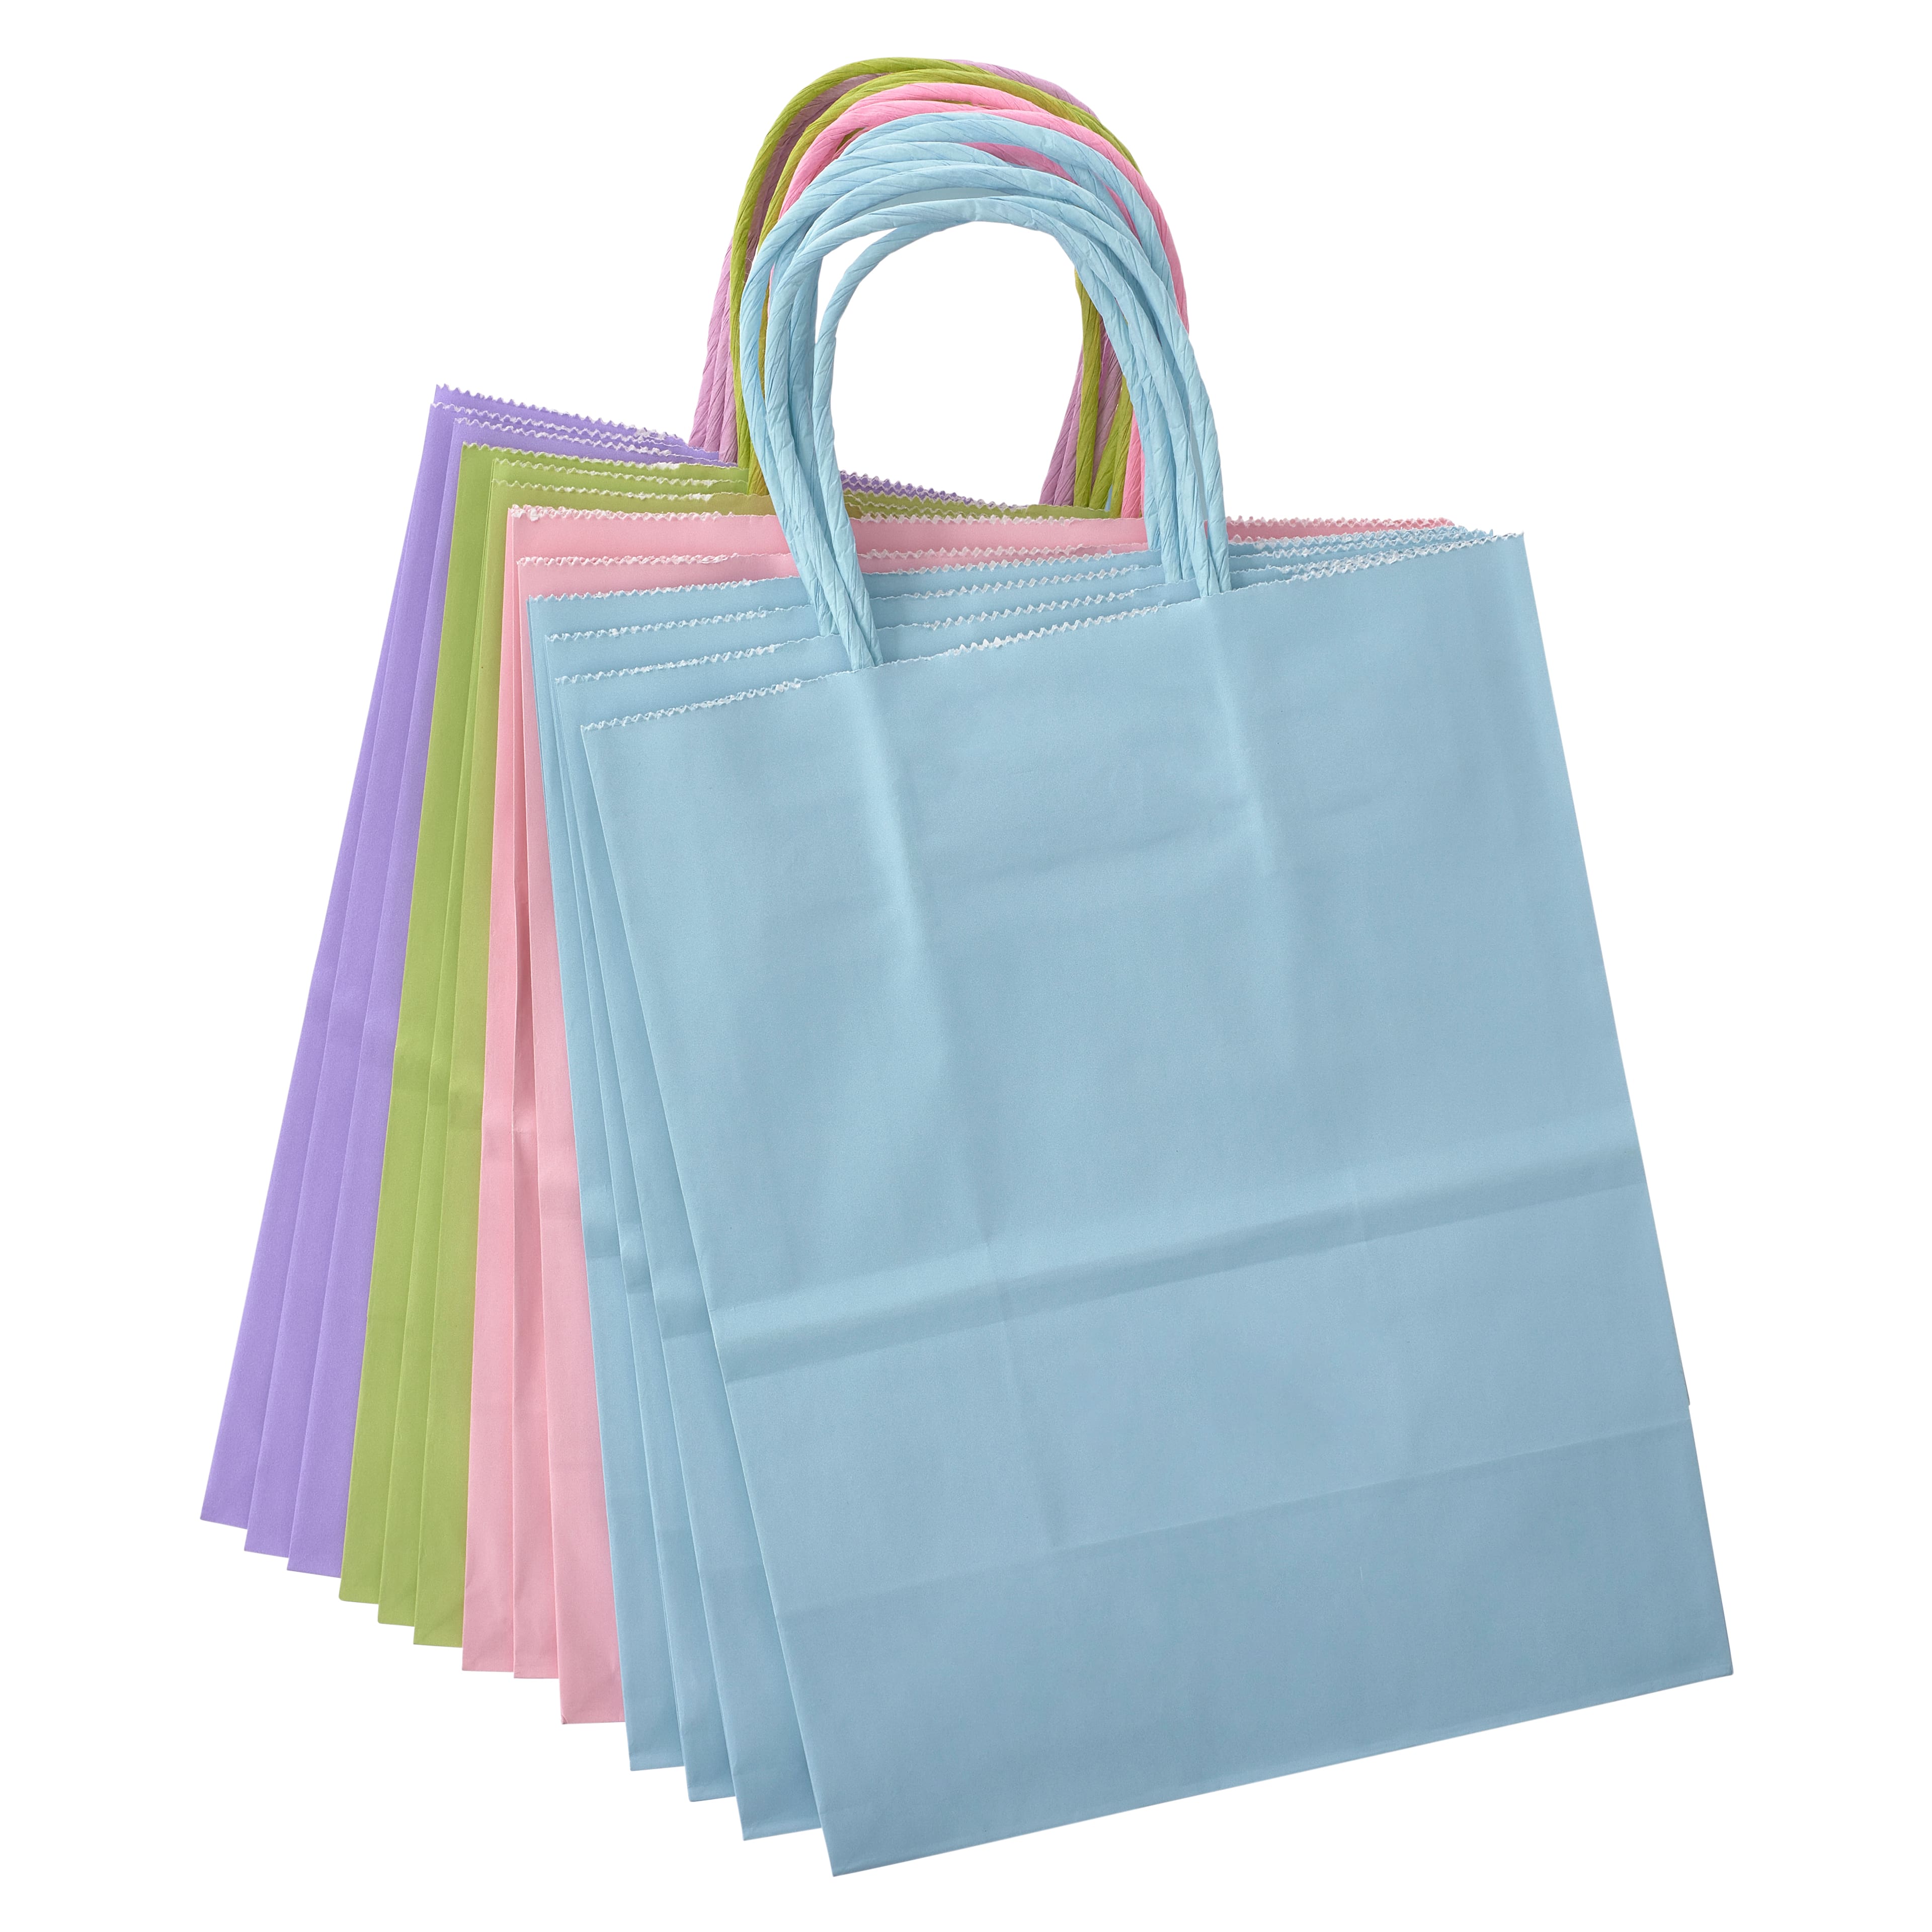 Pastel Assorted Bags, 6 x 3 1/2 x 11, 28 bags - HYG66289